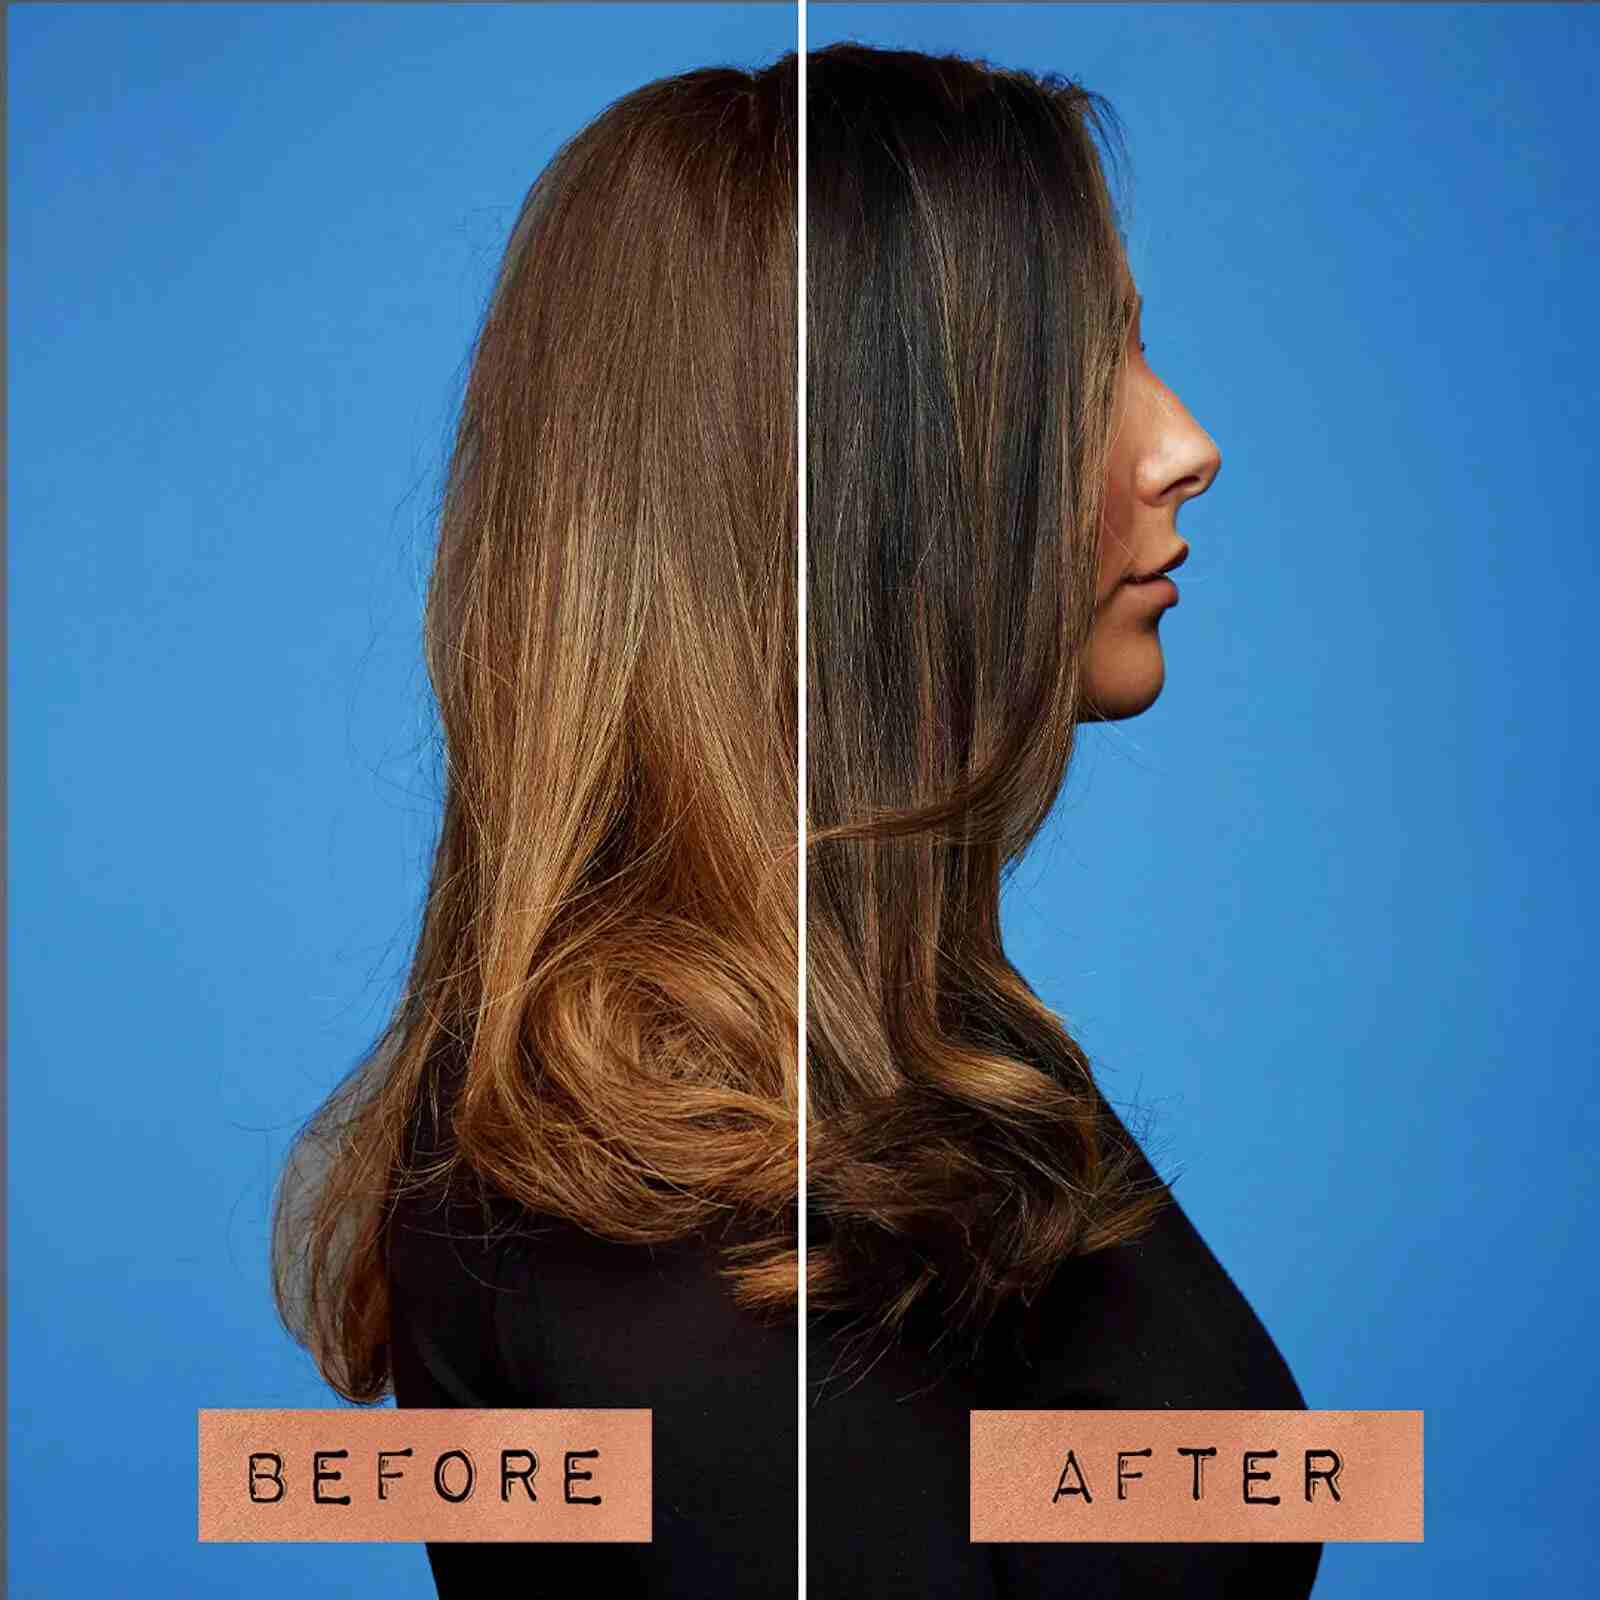 An example of hair before and after using blue shampoo 